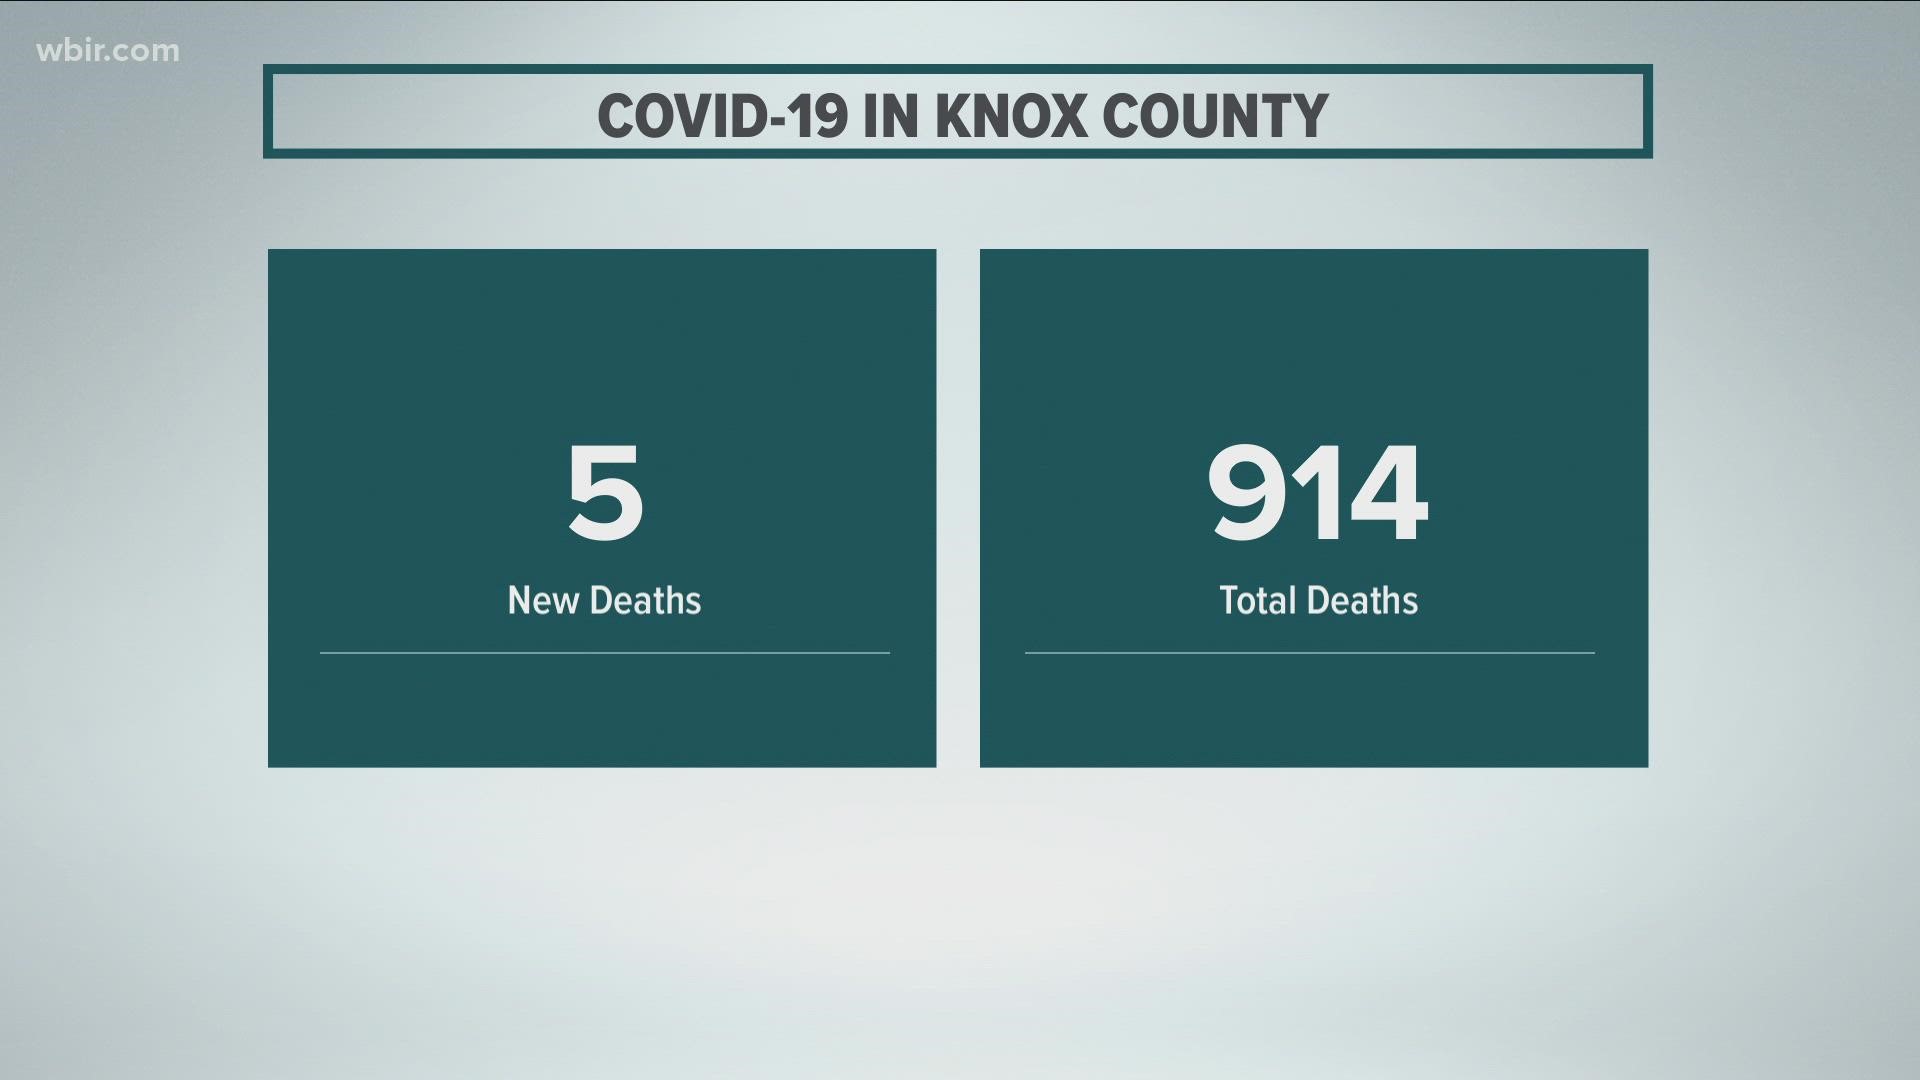 That means 914 people in Knox County have died from the virus.